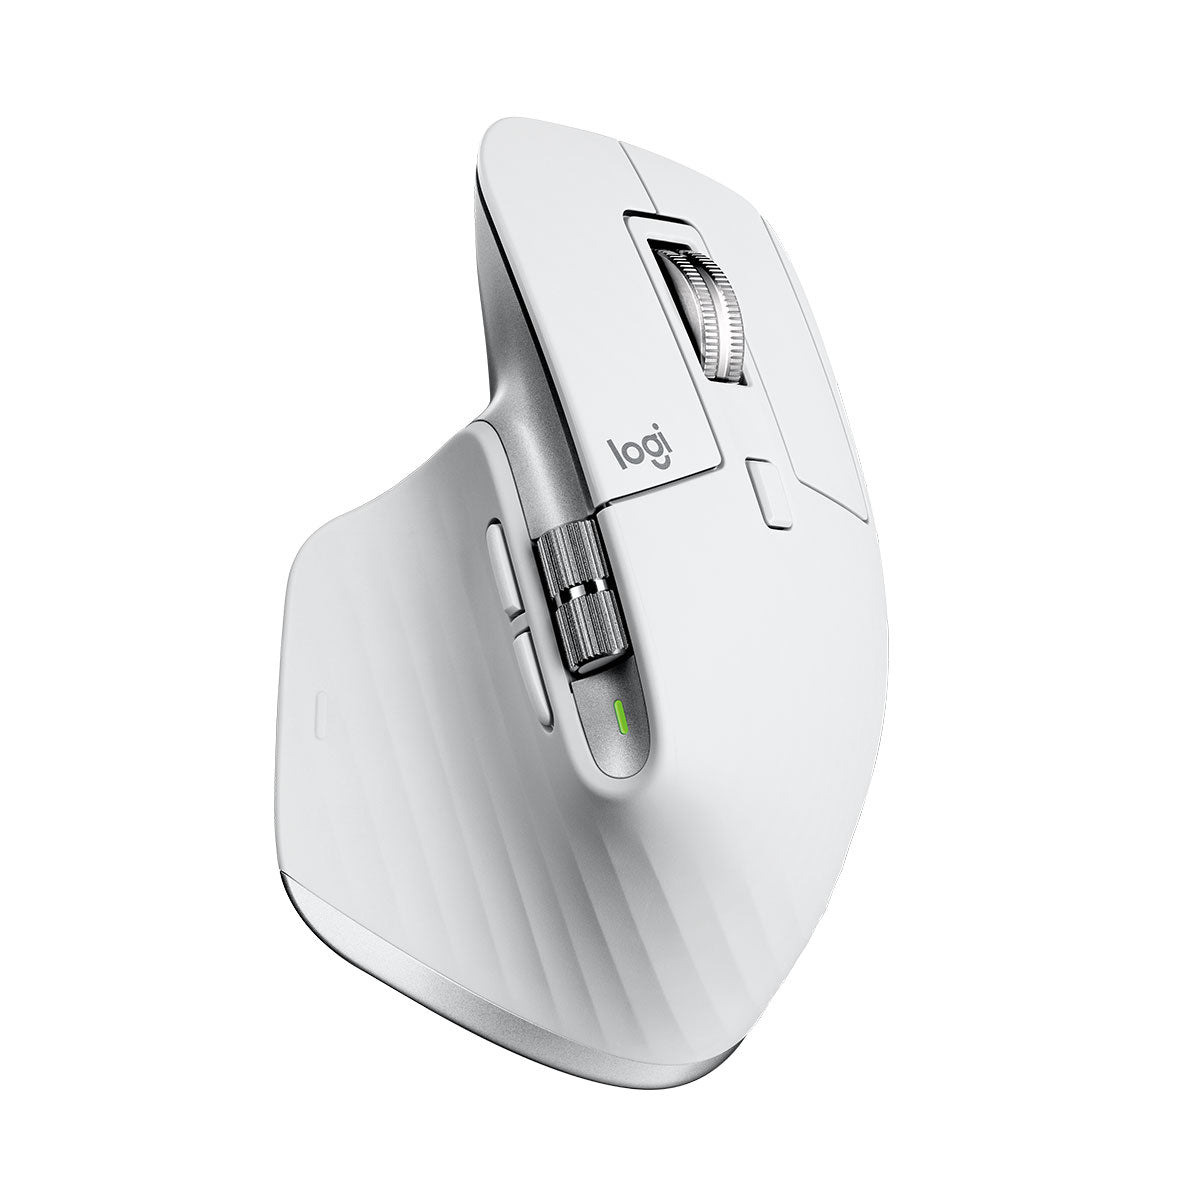 MX MASTER 3S High Performance Wireless Mouse